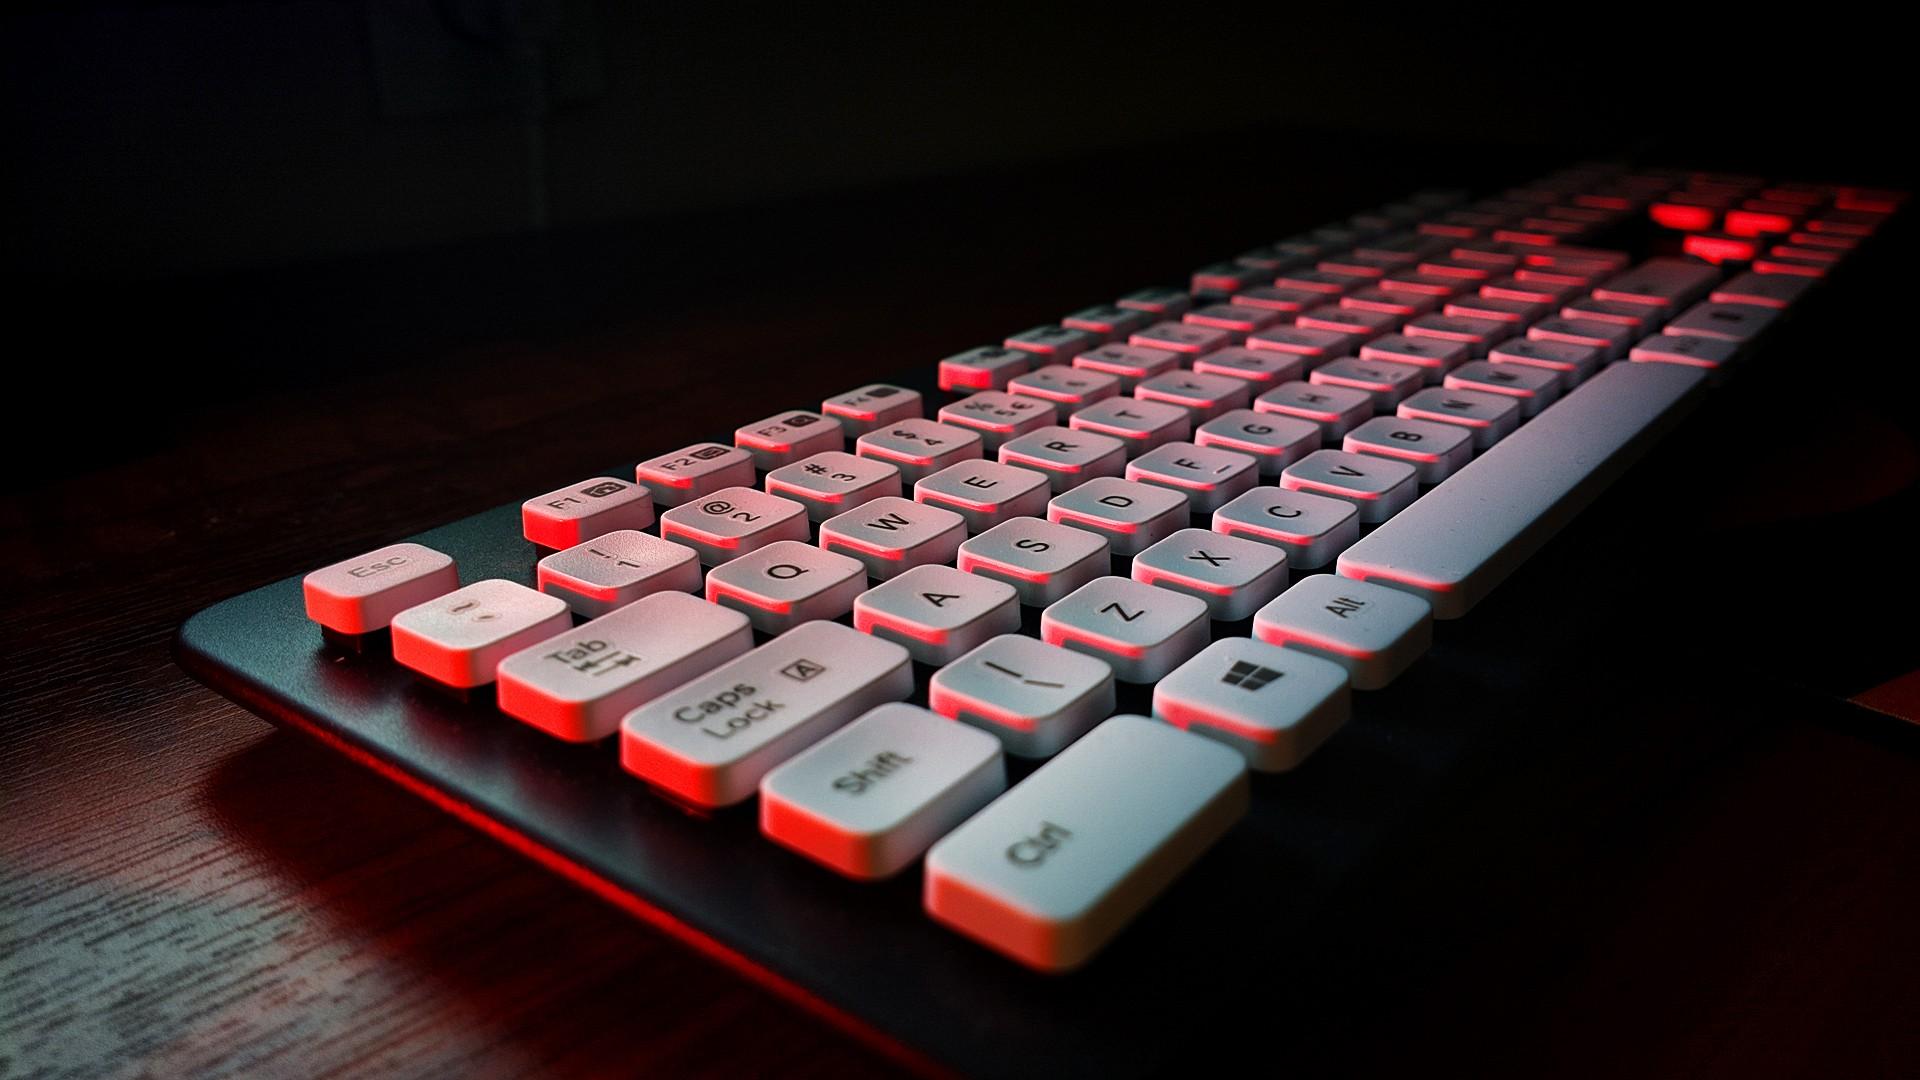 Keyboard Wallpaper, Picture, Image